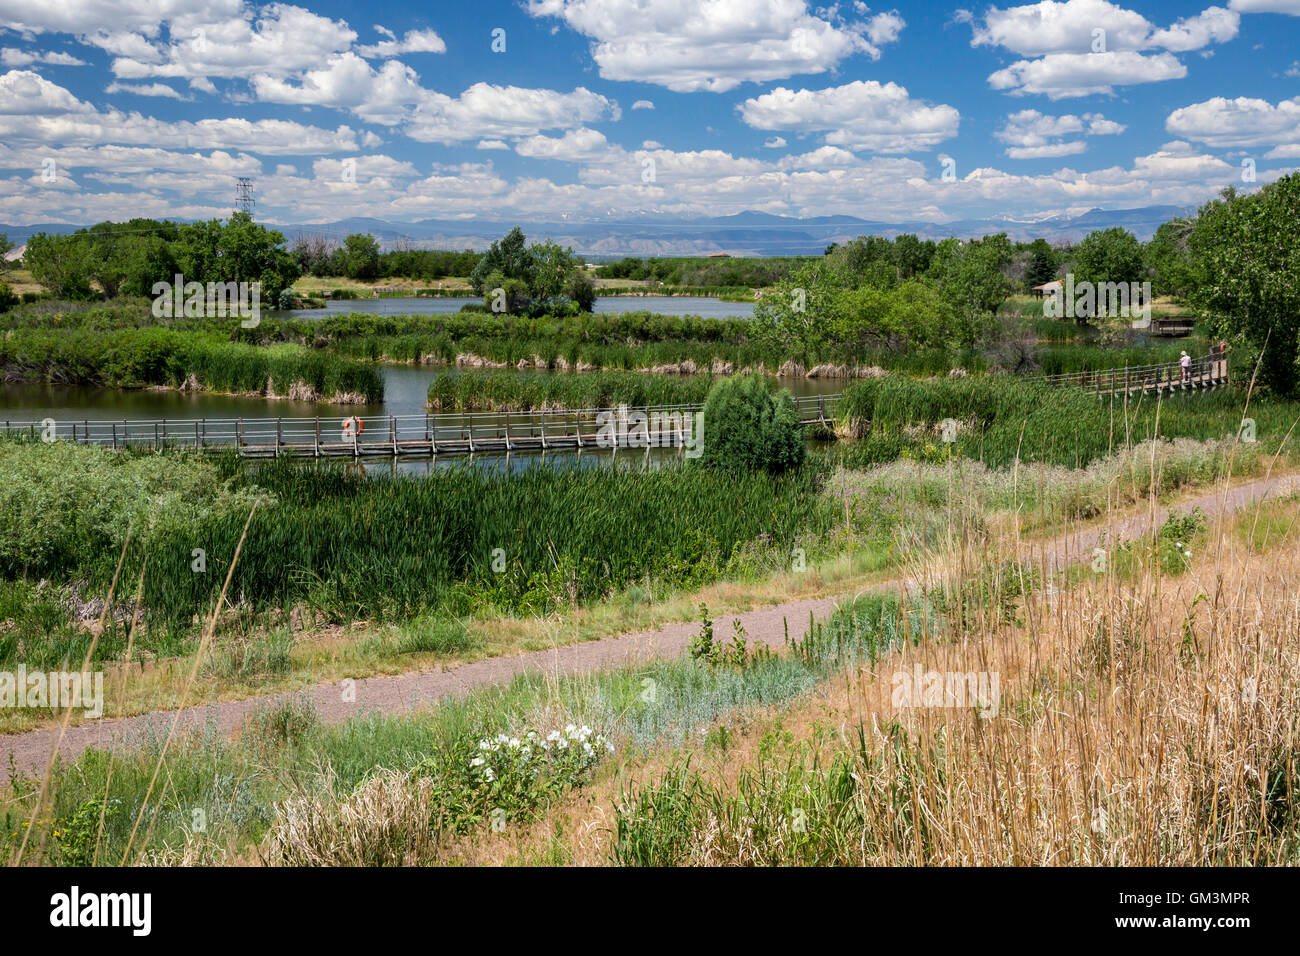 Denver, Colorado - The Rocky Mountain Arsenal National Wildlife Refuge, formerly an army facility producing chemical weapons. Stock Photo